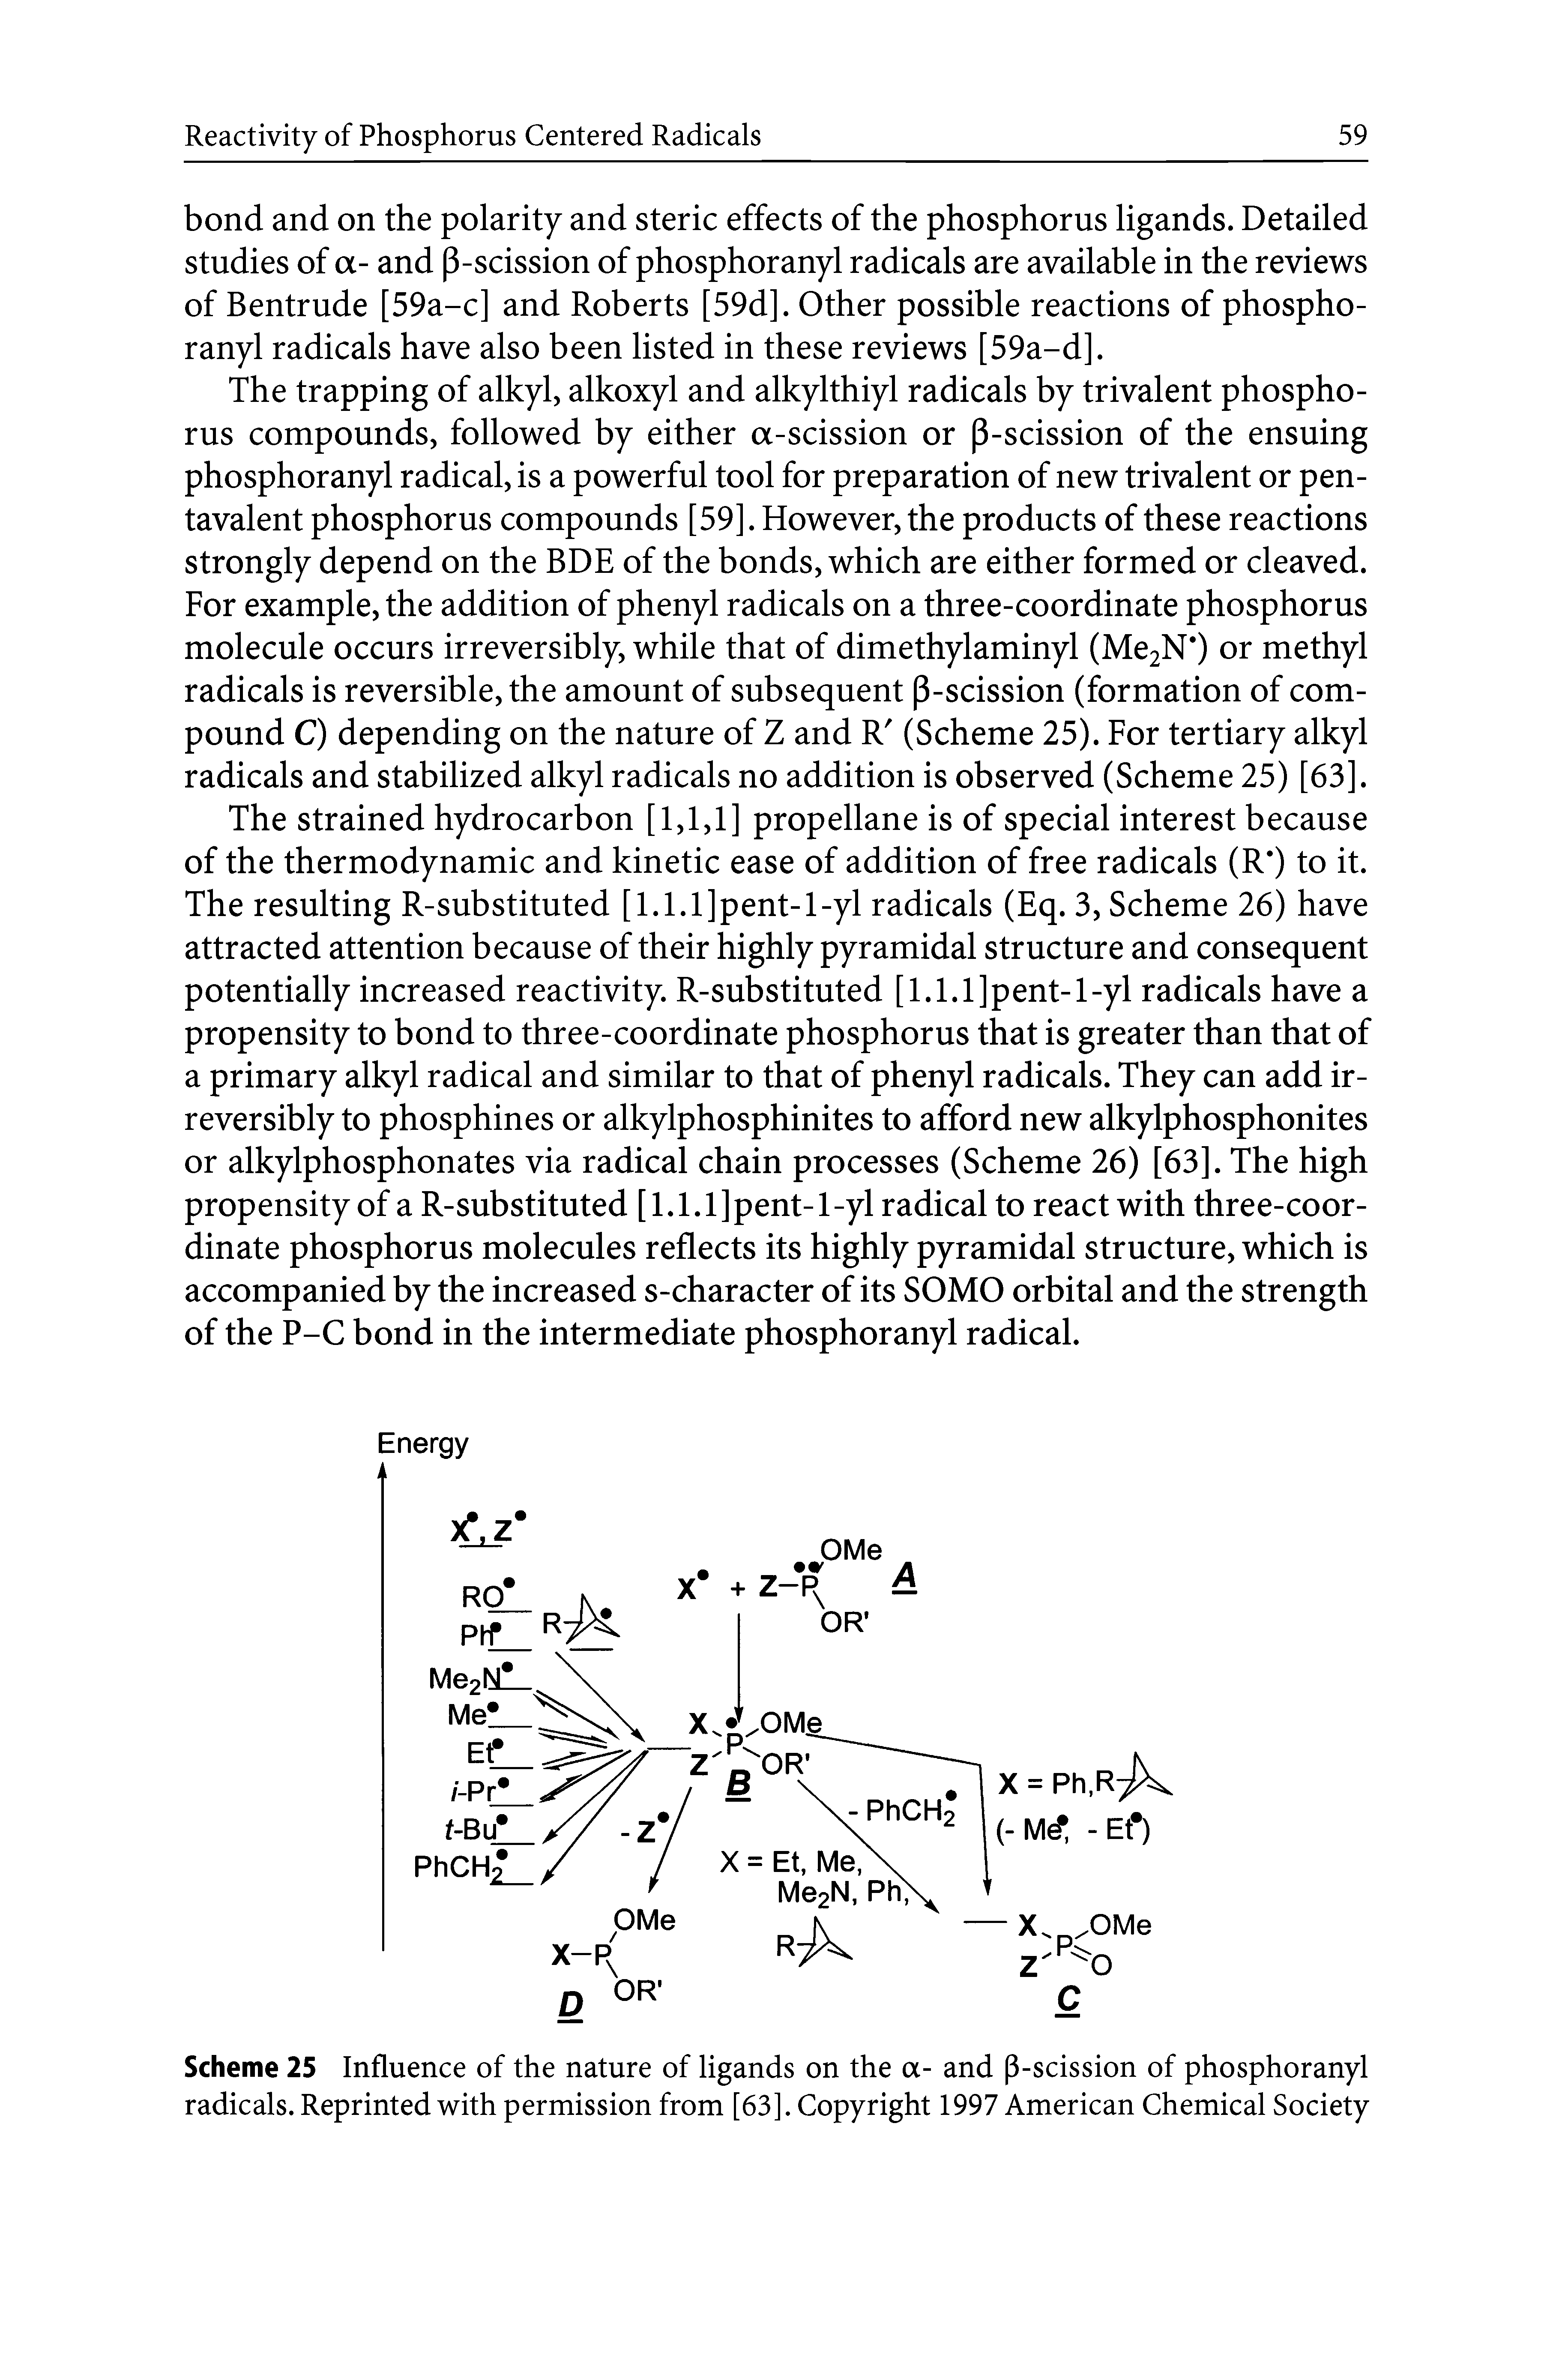 Scheme 25 Influence of the nature of ligands on the a- and p-scission of phosphoranyl radicals. Reprinted with permission from [63]. Copyright 1997 American Chemical Society...